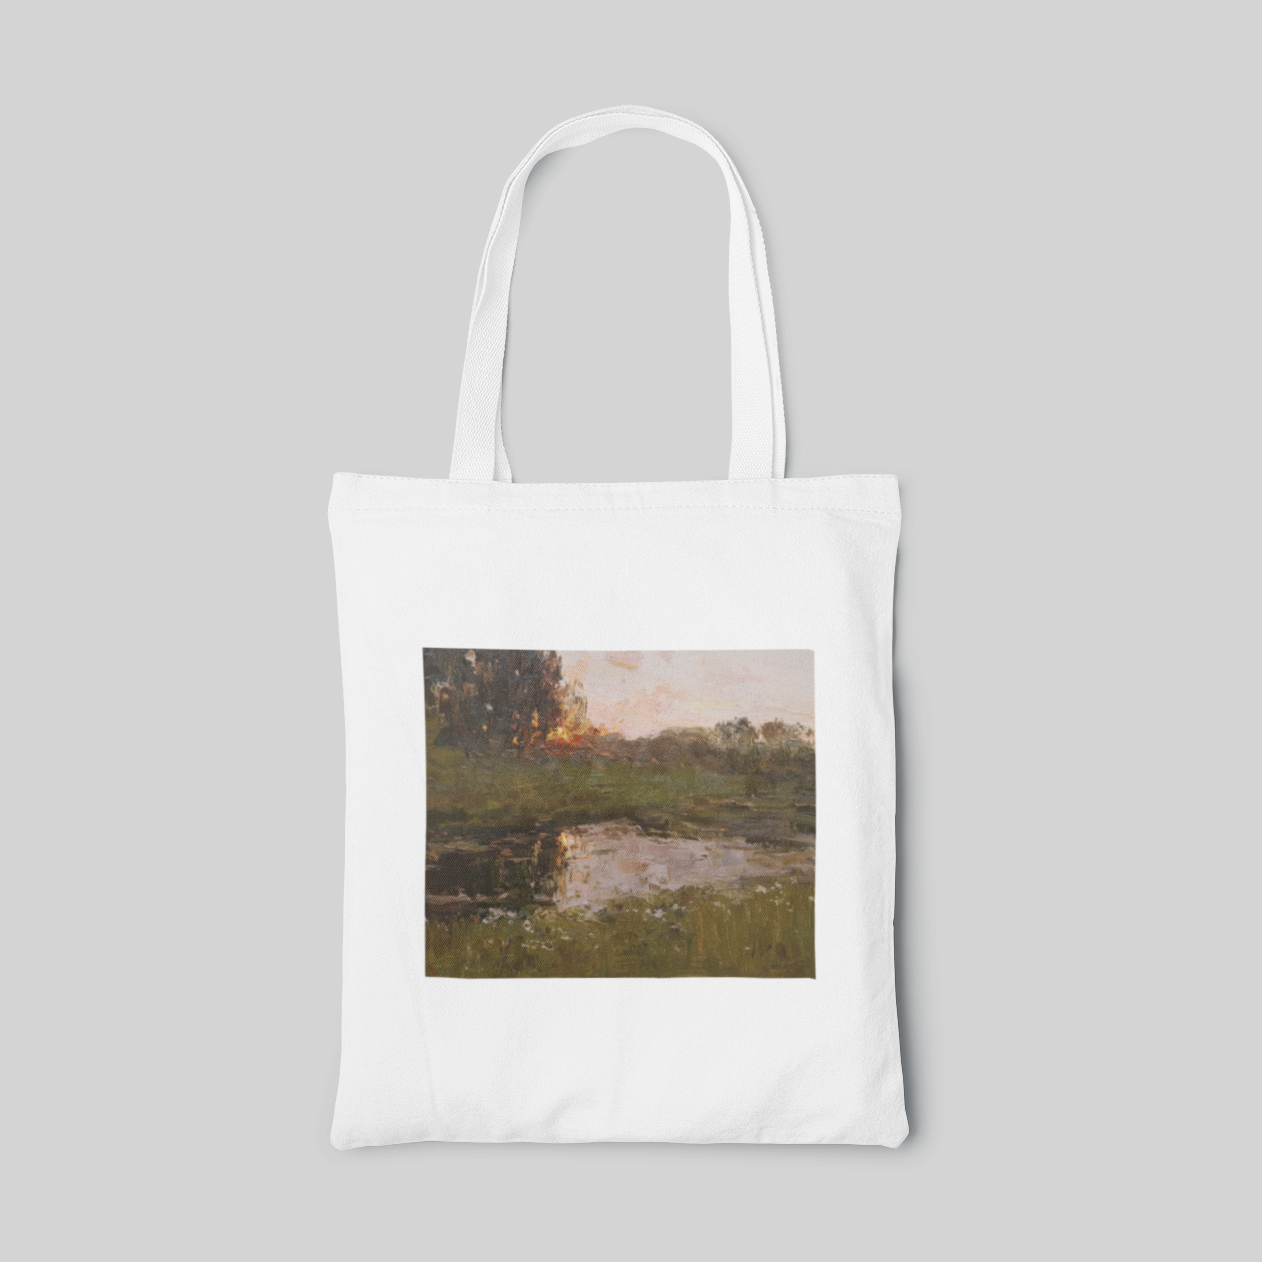 White oil painting designed tote bag with dull green and pink sunset landscape on river, front side